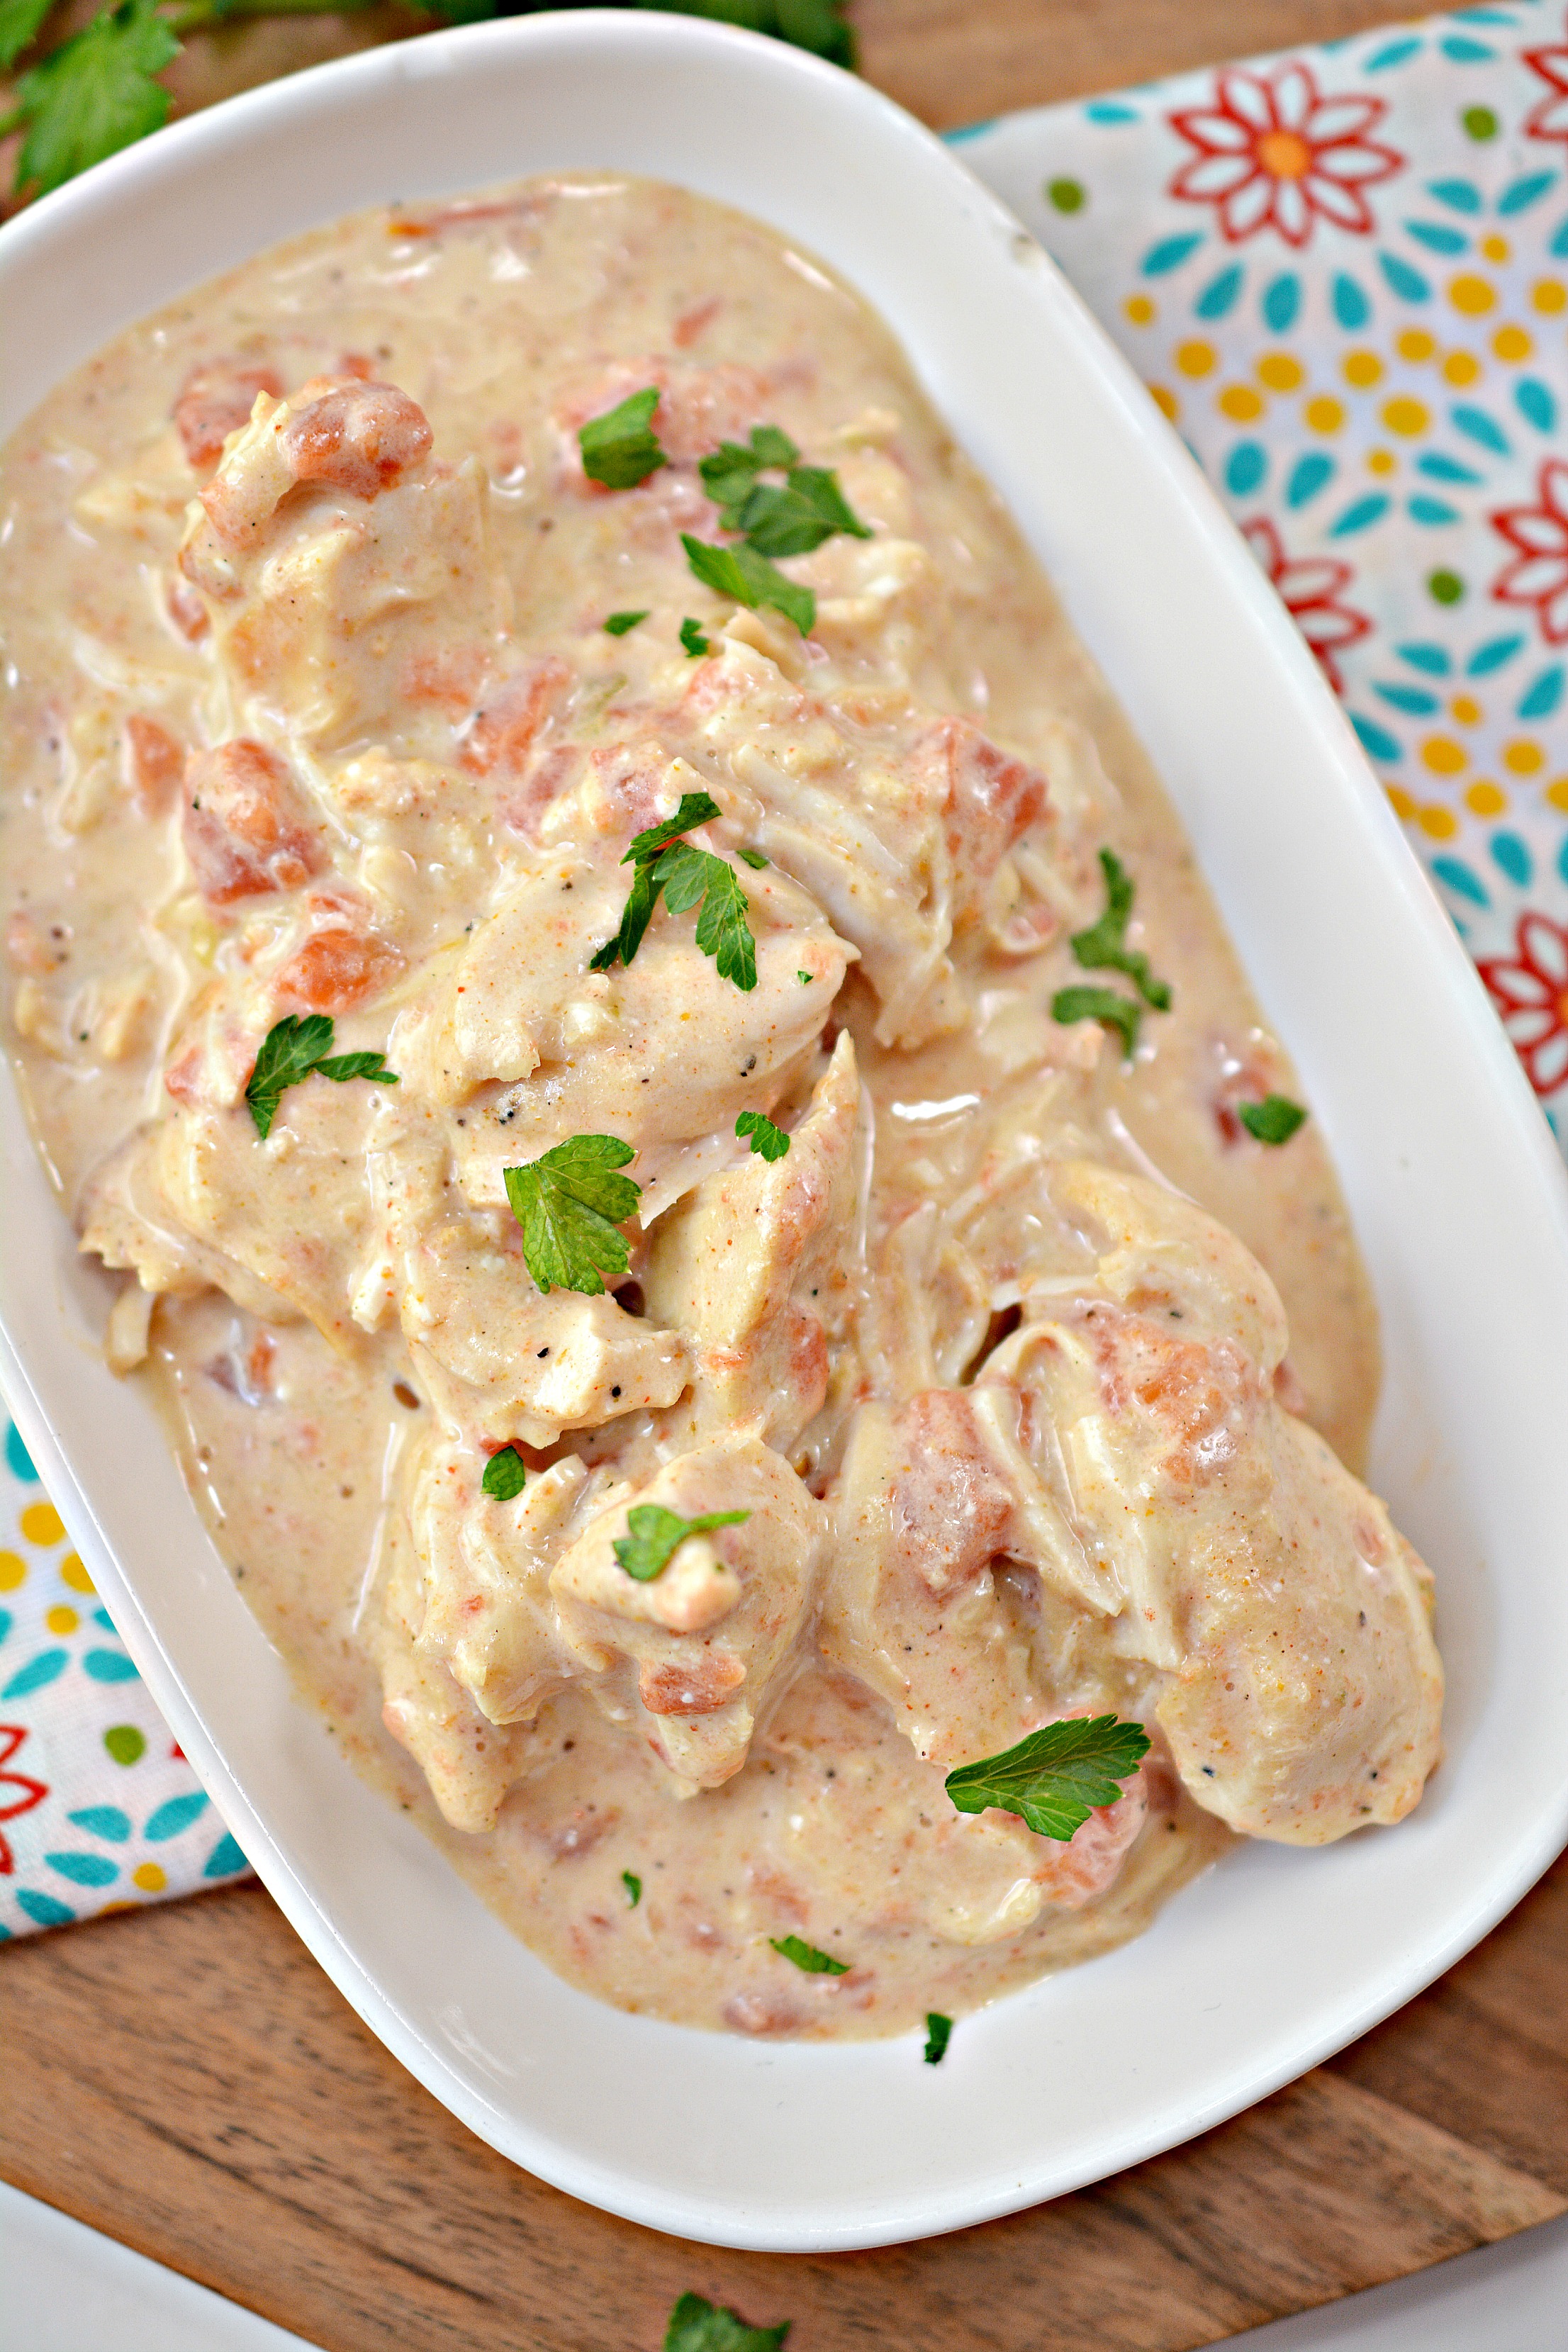 Looking for an easy keto chicken recipe? This delicious keto Instant Pot Queso chicken is fast to make and has amazing flavors. Dinner is ready "start to finish" in 40 minutes. You're going to love this easy low-carb keto recipe!